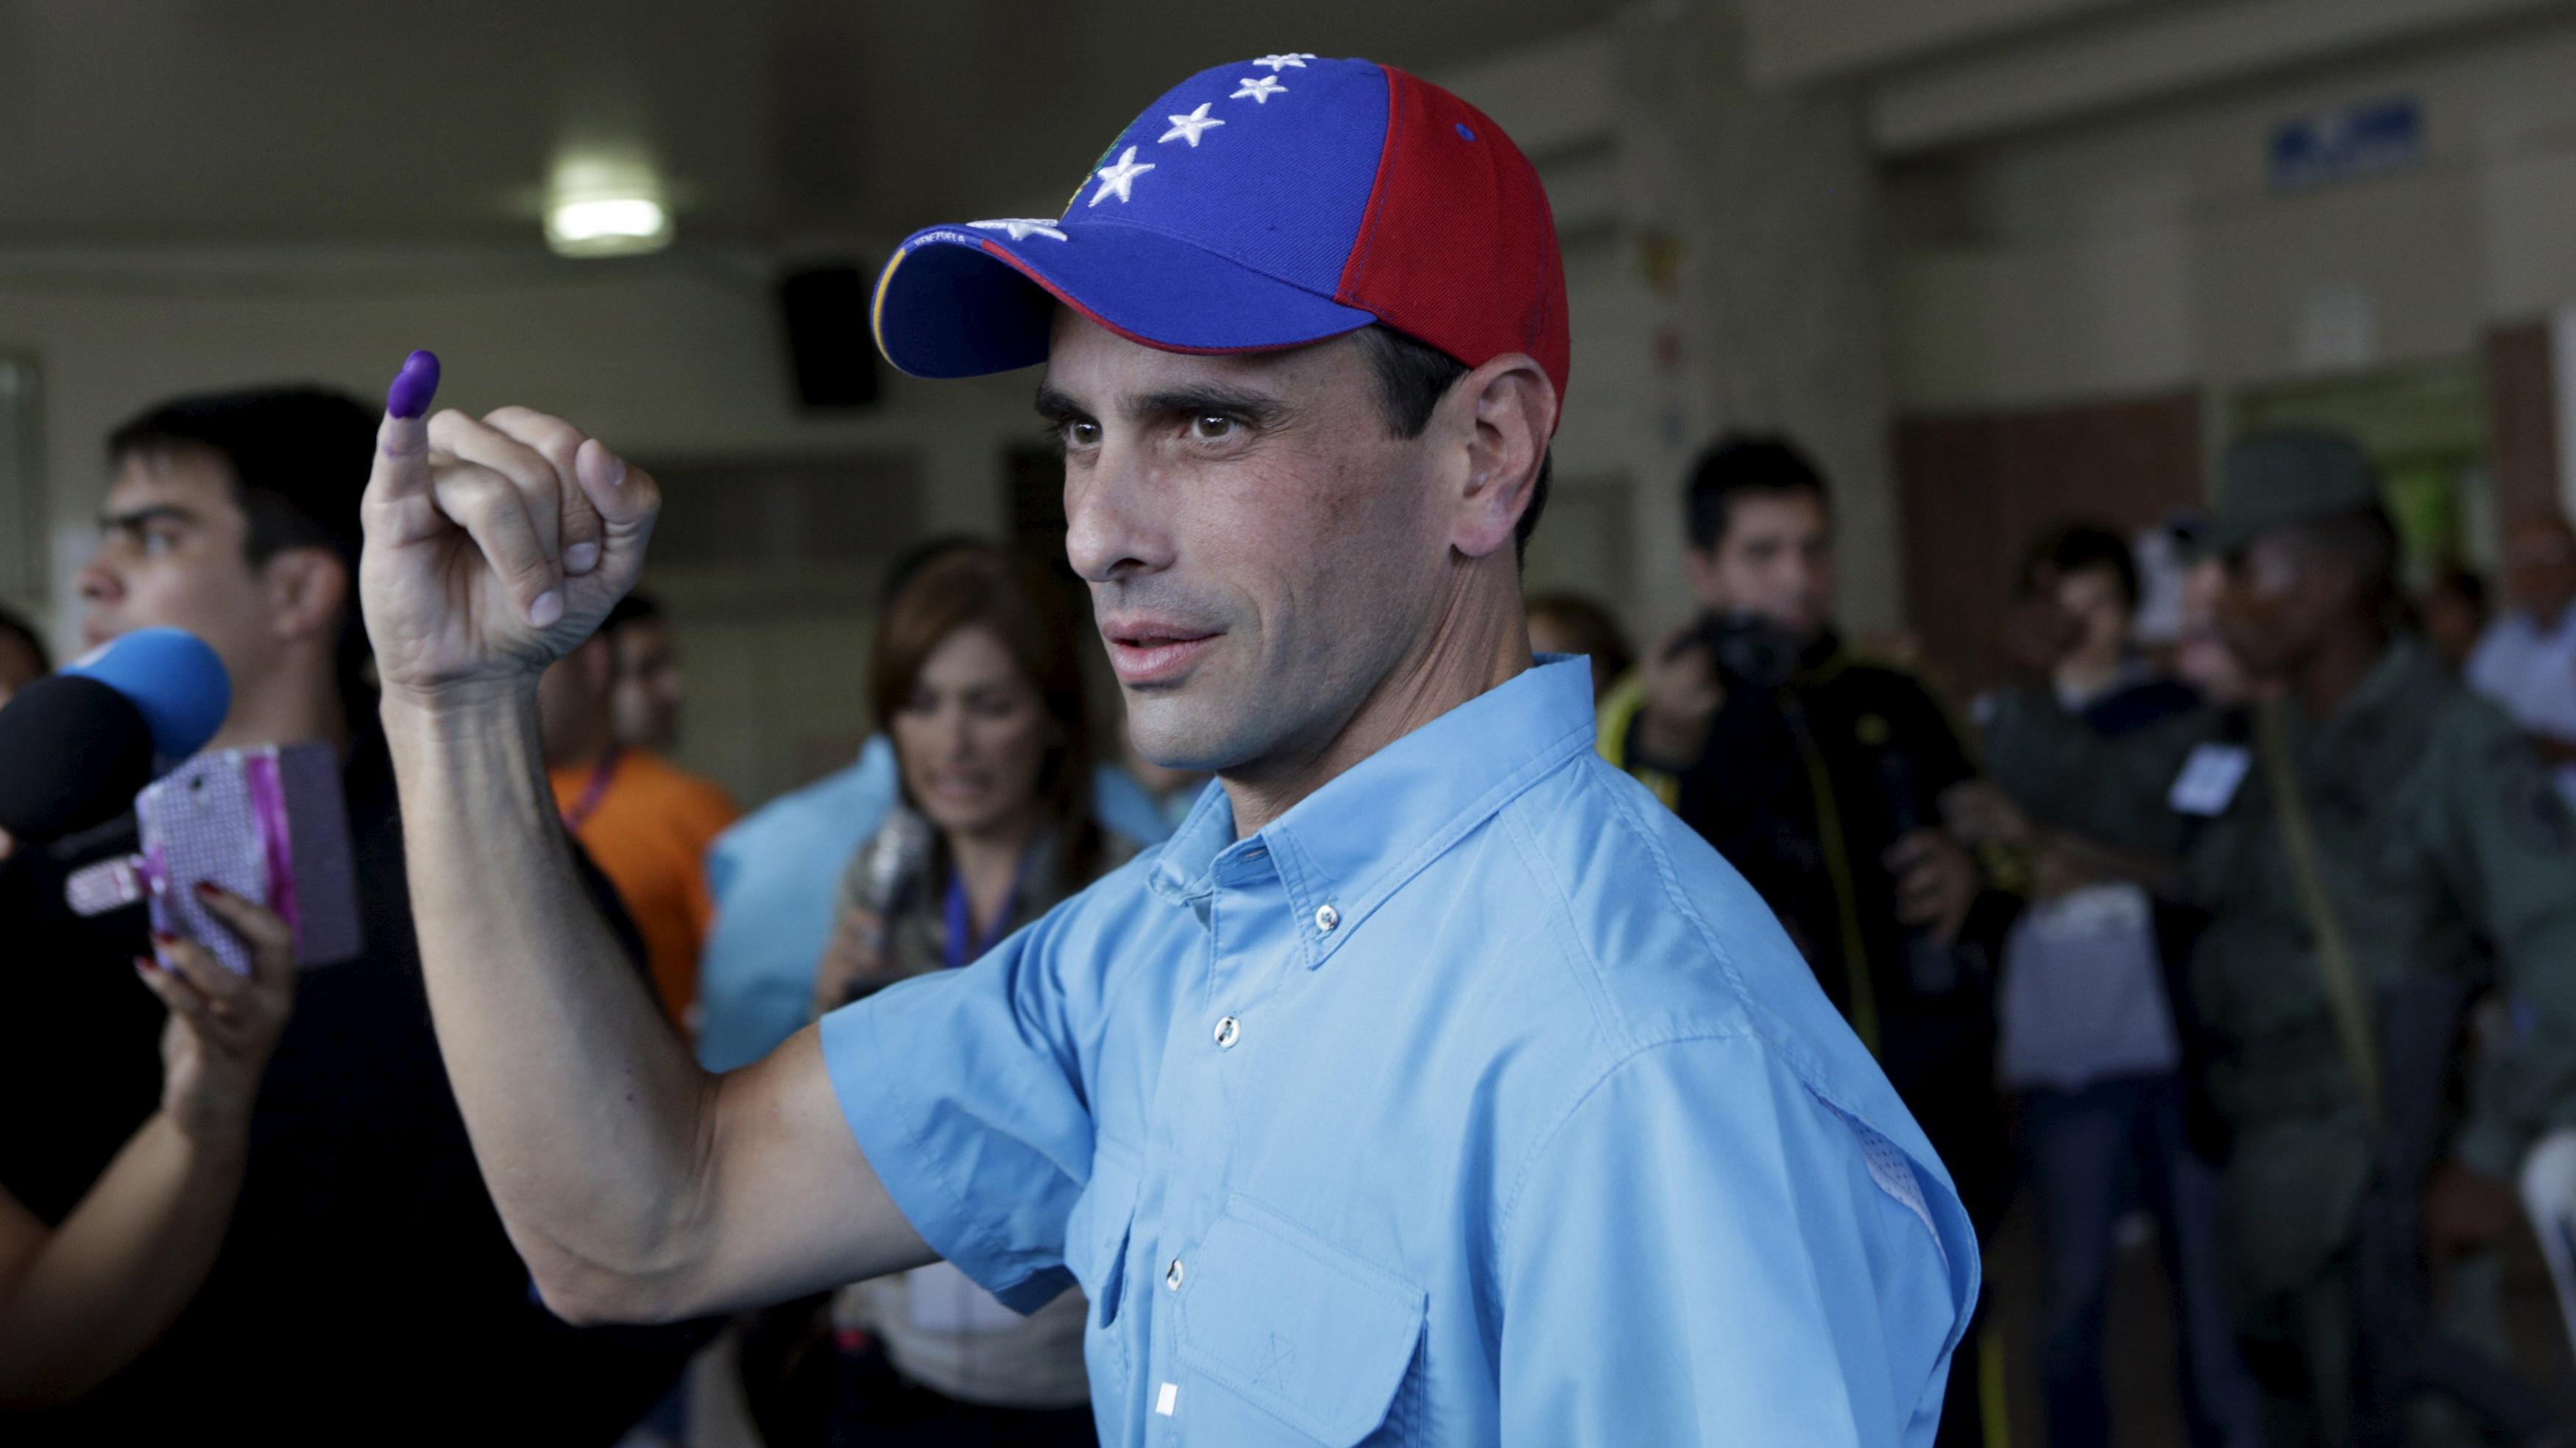 Venezuelan opposition leader Henrique Capriles shows his ink-stained finger after casting his vote at a polling station during a legislative election, in Caracas.